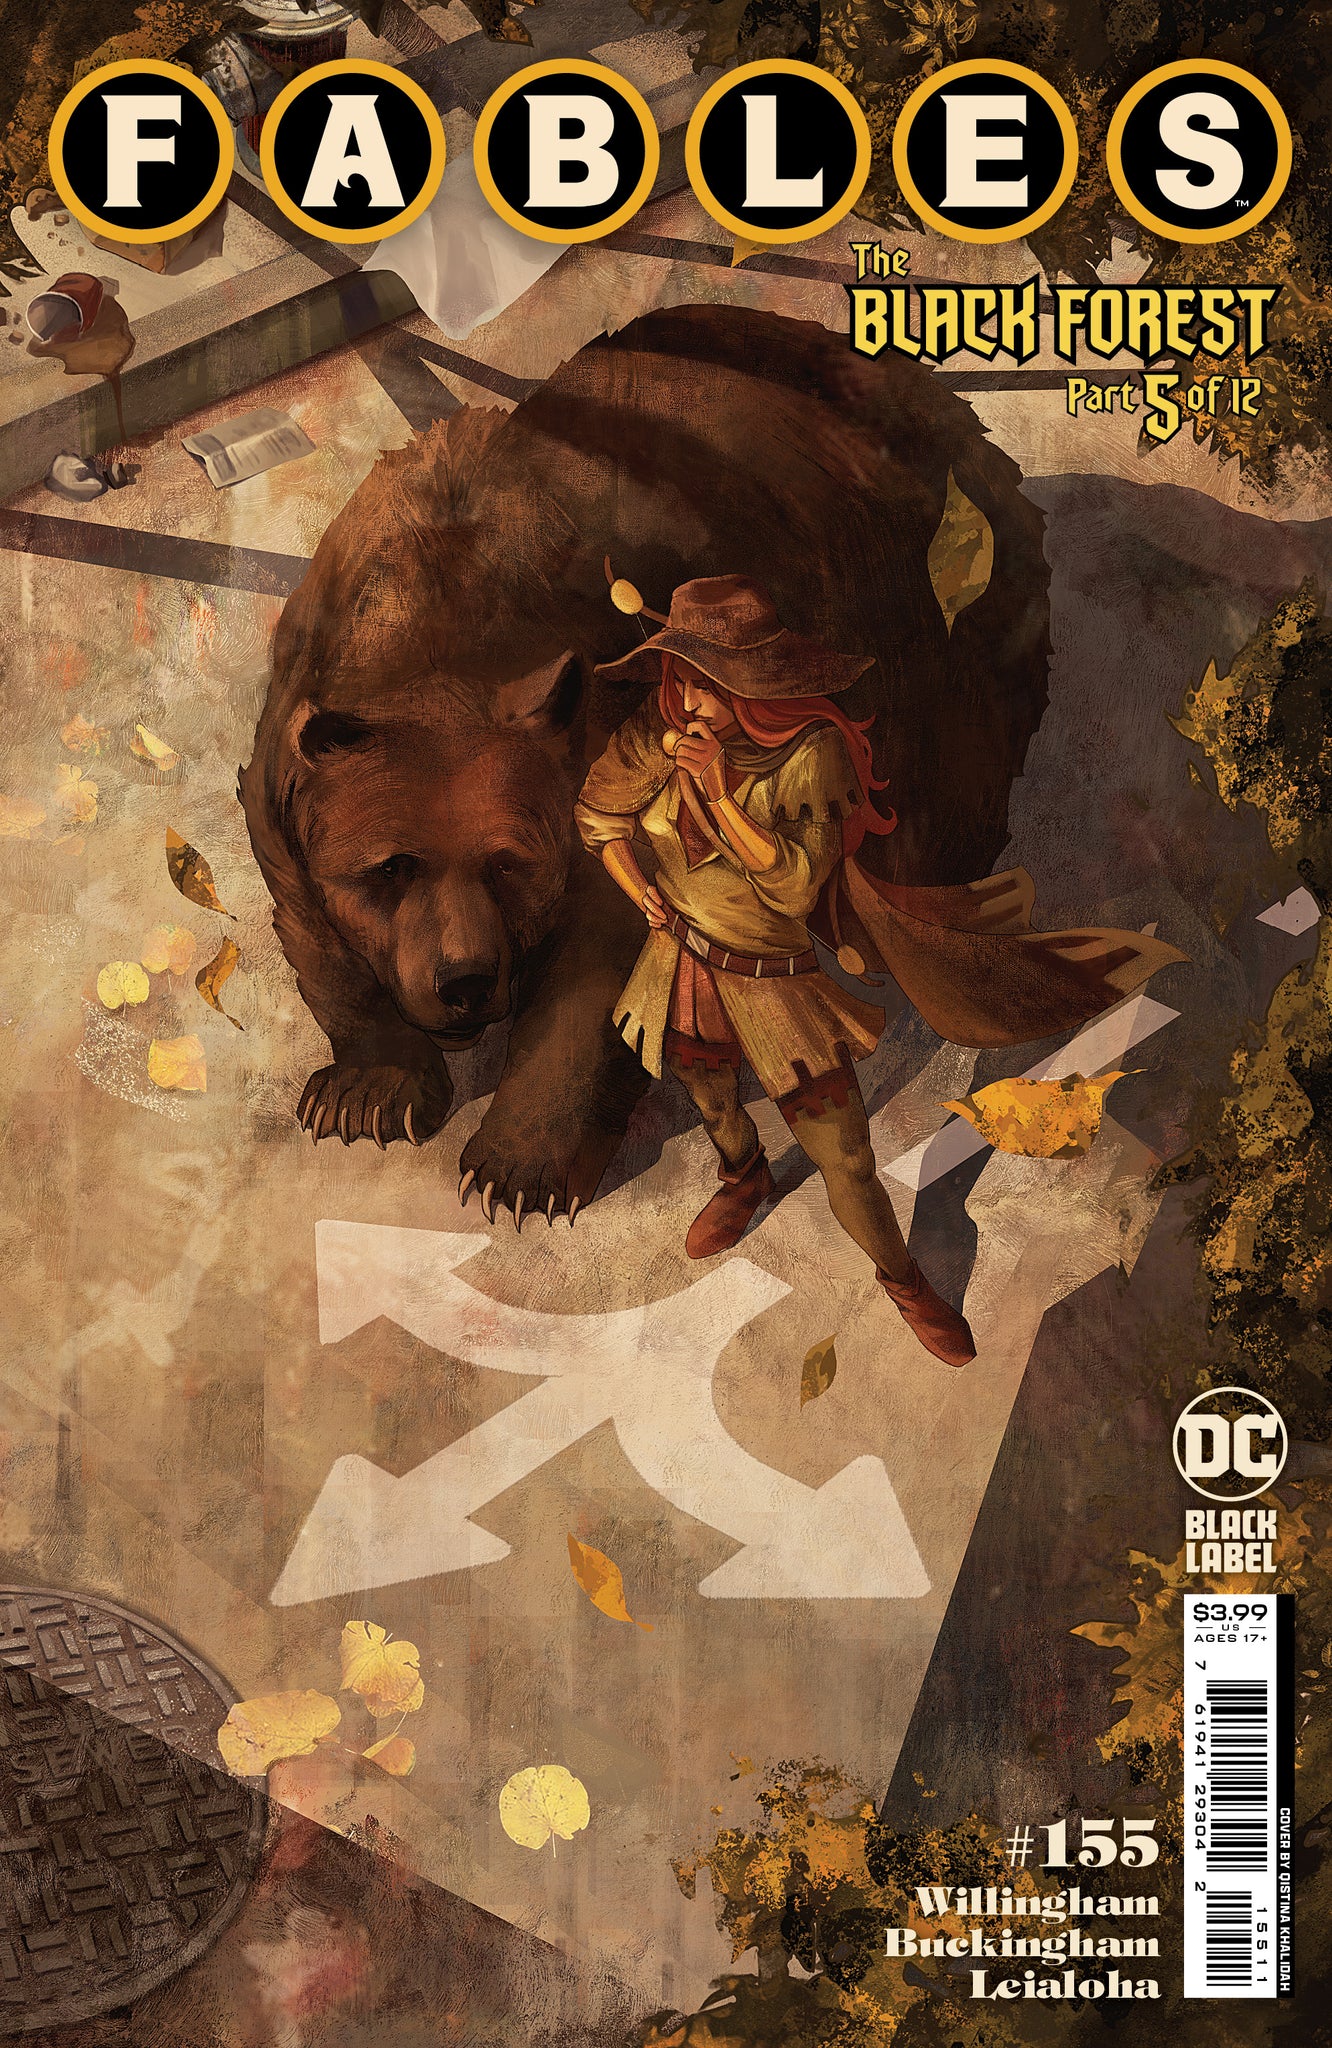 FABLES #155 (OF 162)